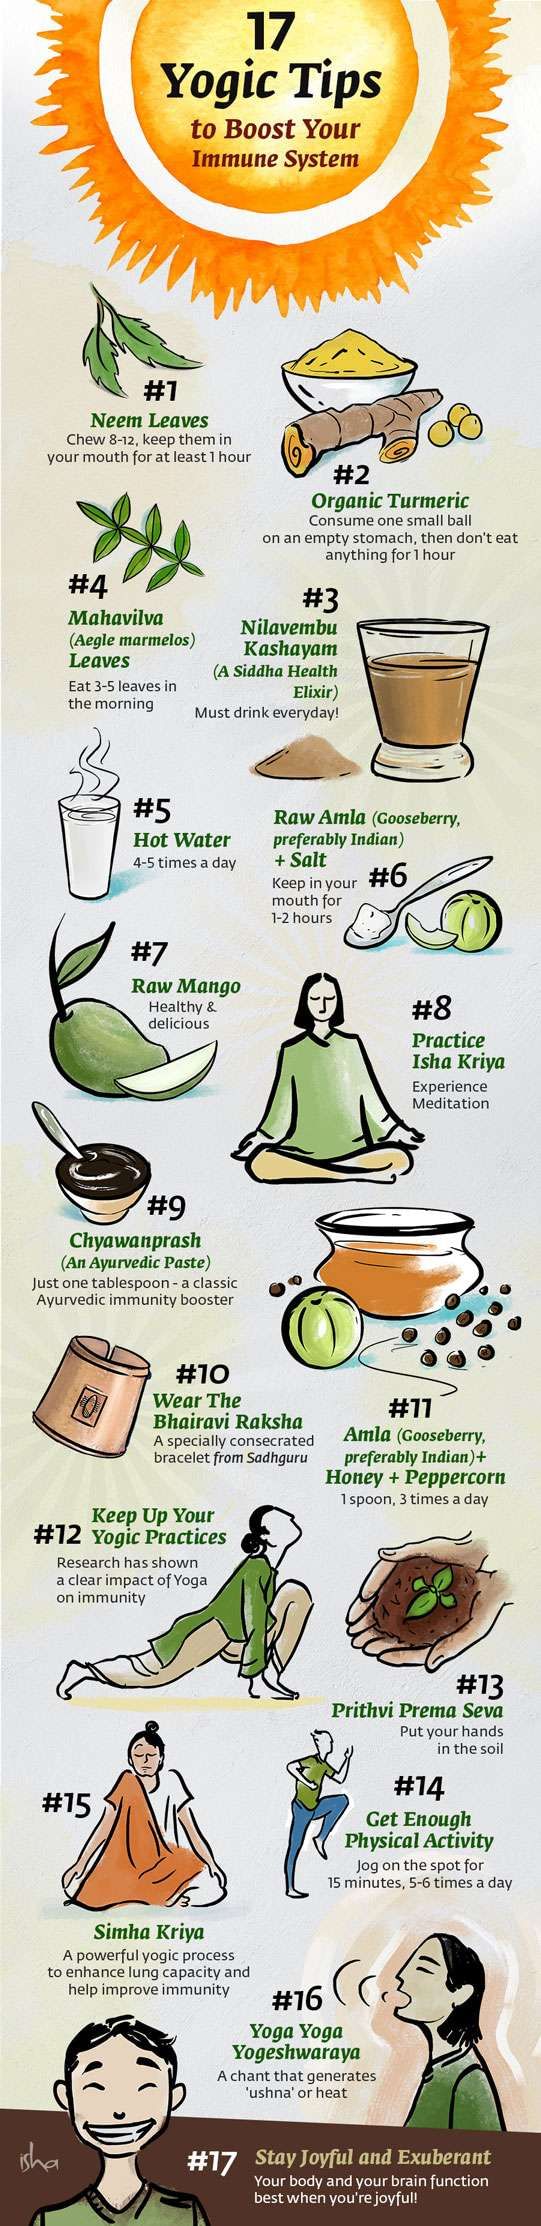 Infographic - 17 Tips to Boost Your Immune System